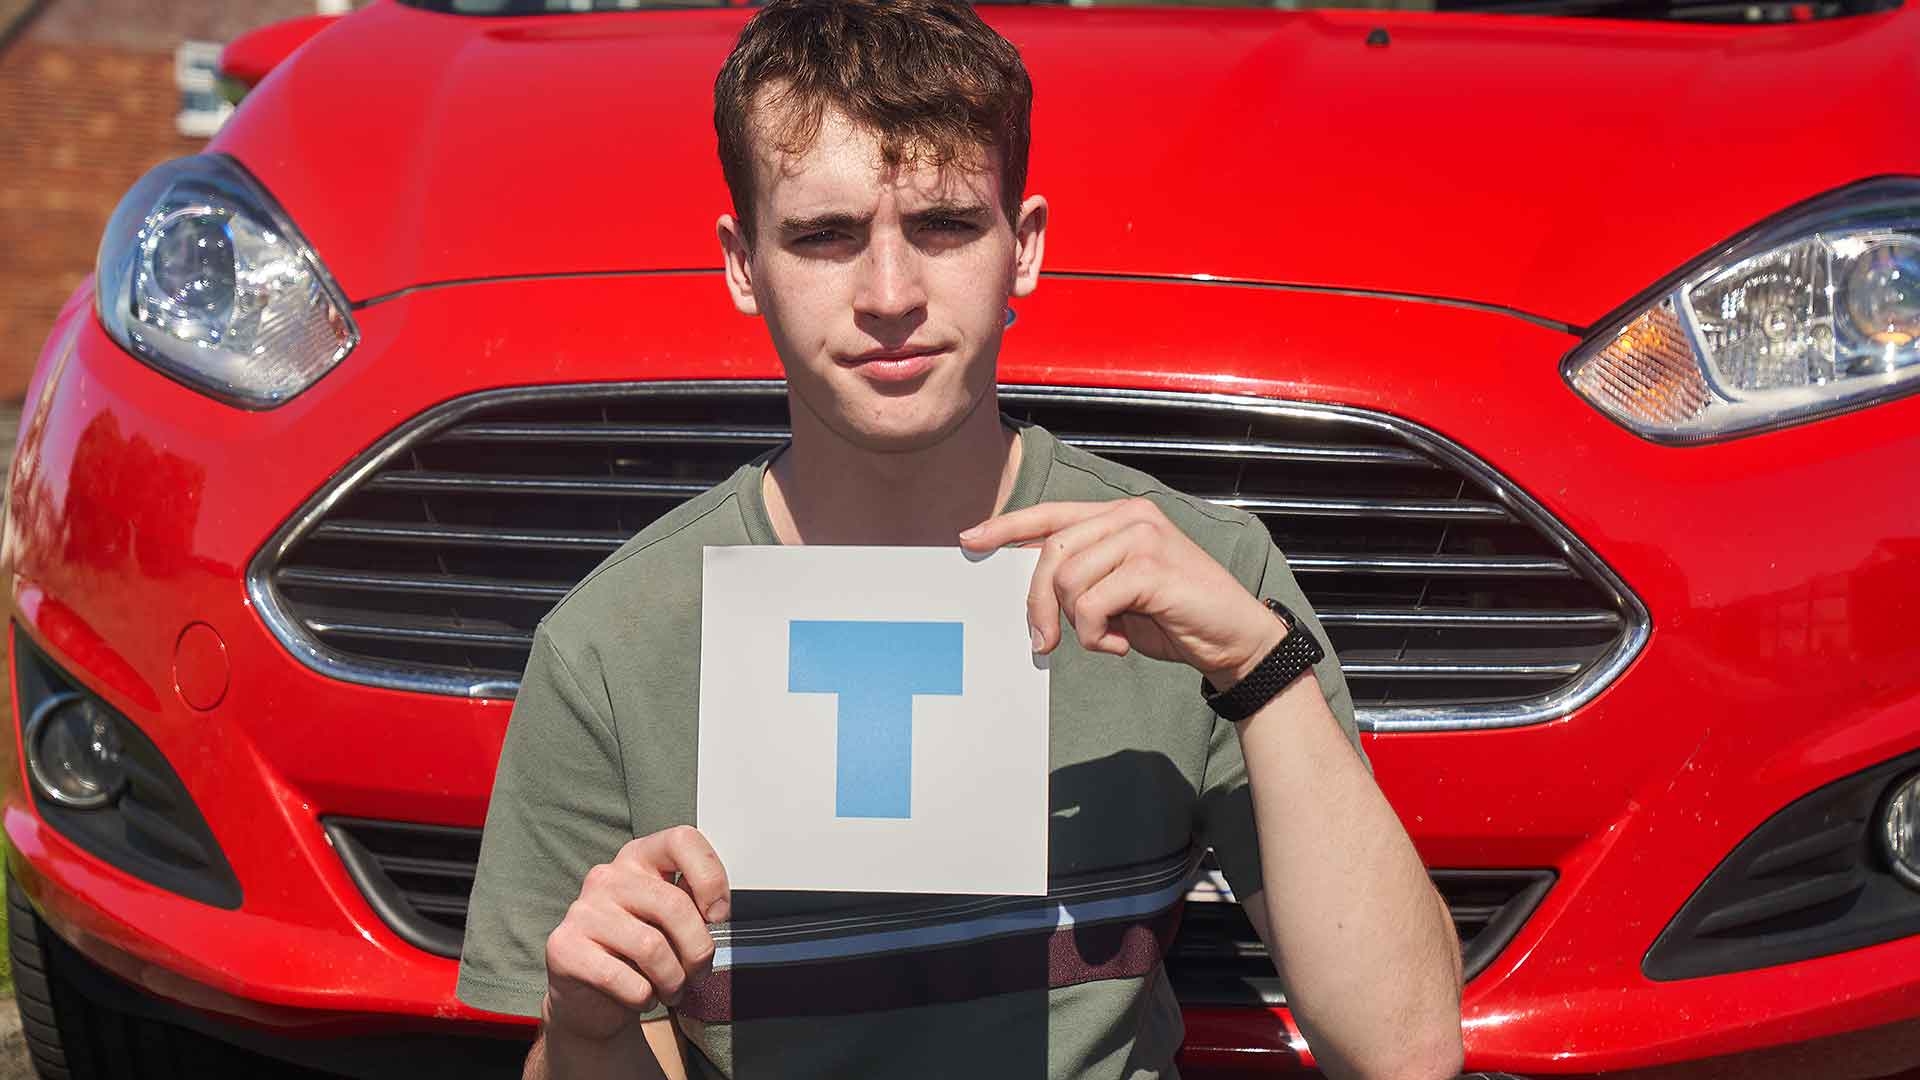 Young driver with a T-plate